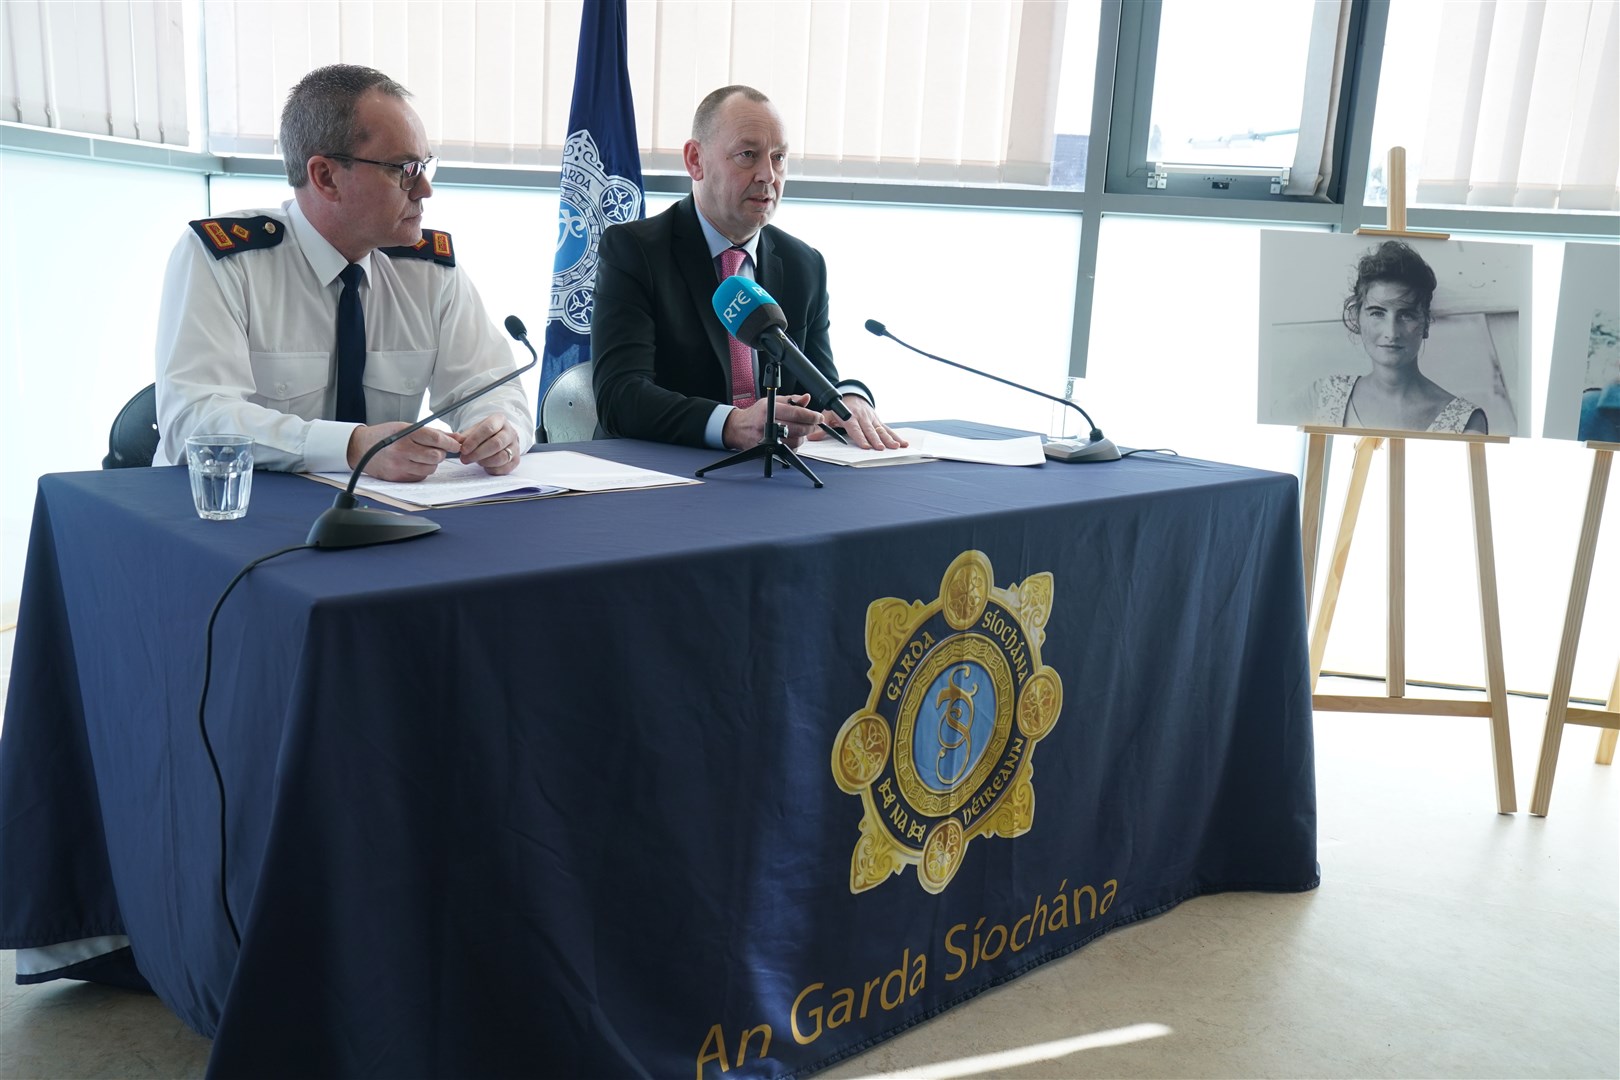 Superintendent Tim Burke (left) and Detective Superintendent Eddie Carroll speaking to the media (Brian Lawless/PA)